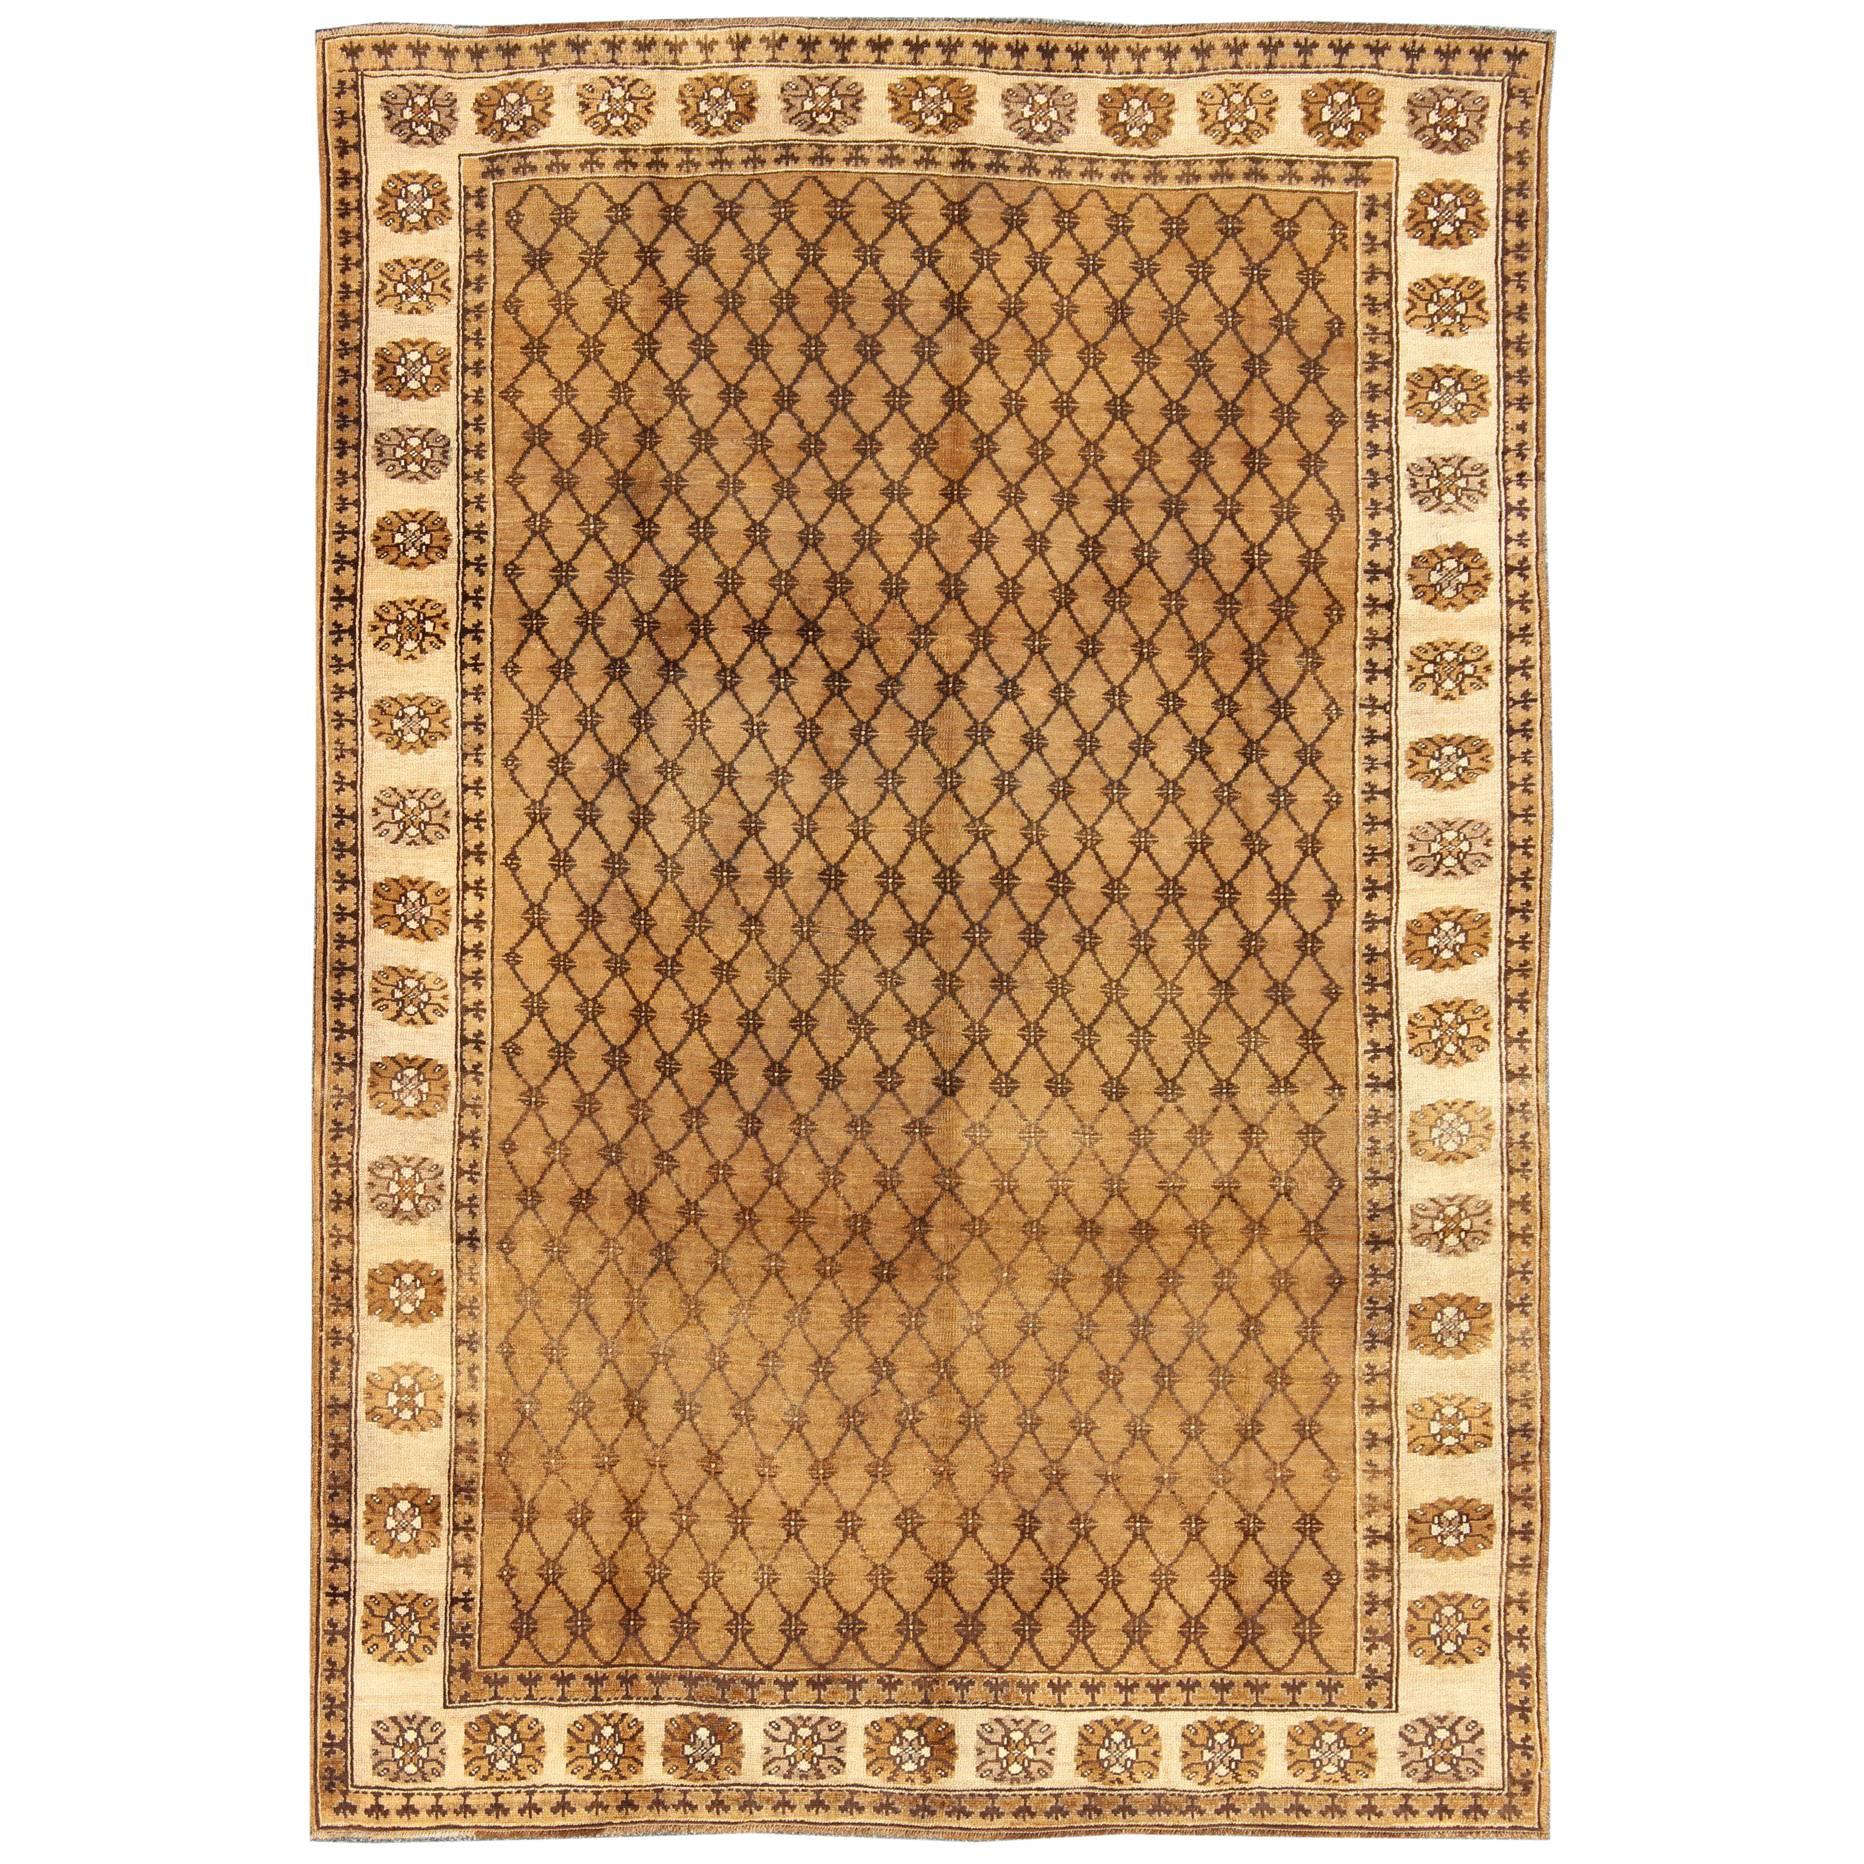 Vintage Turkish Rug with Modern Design in Brown, Mocha and Cream